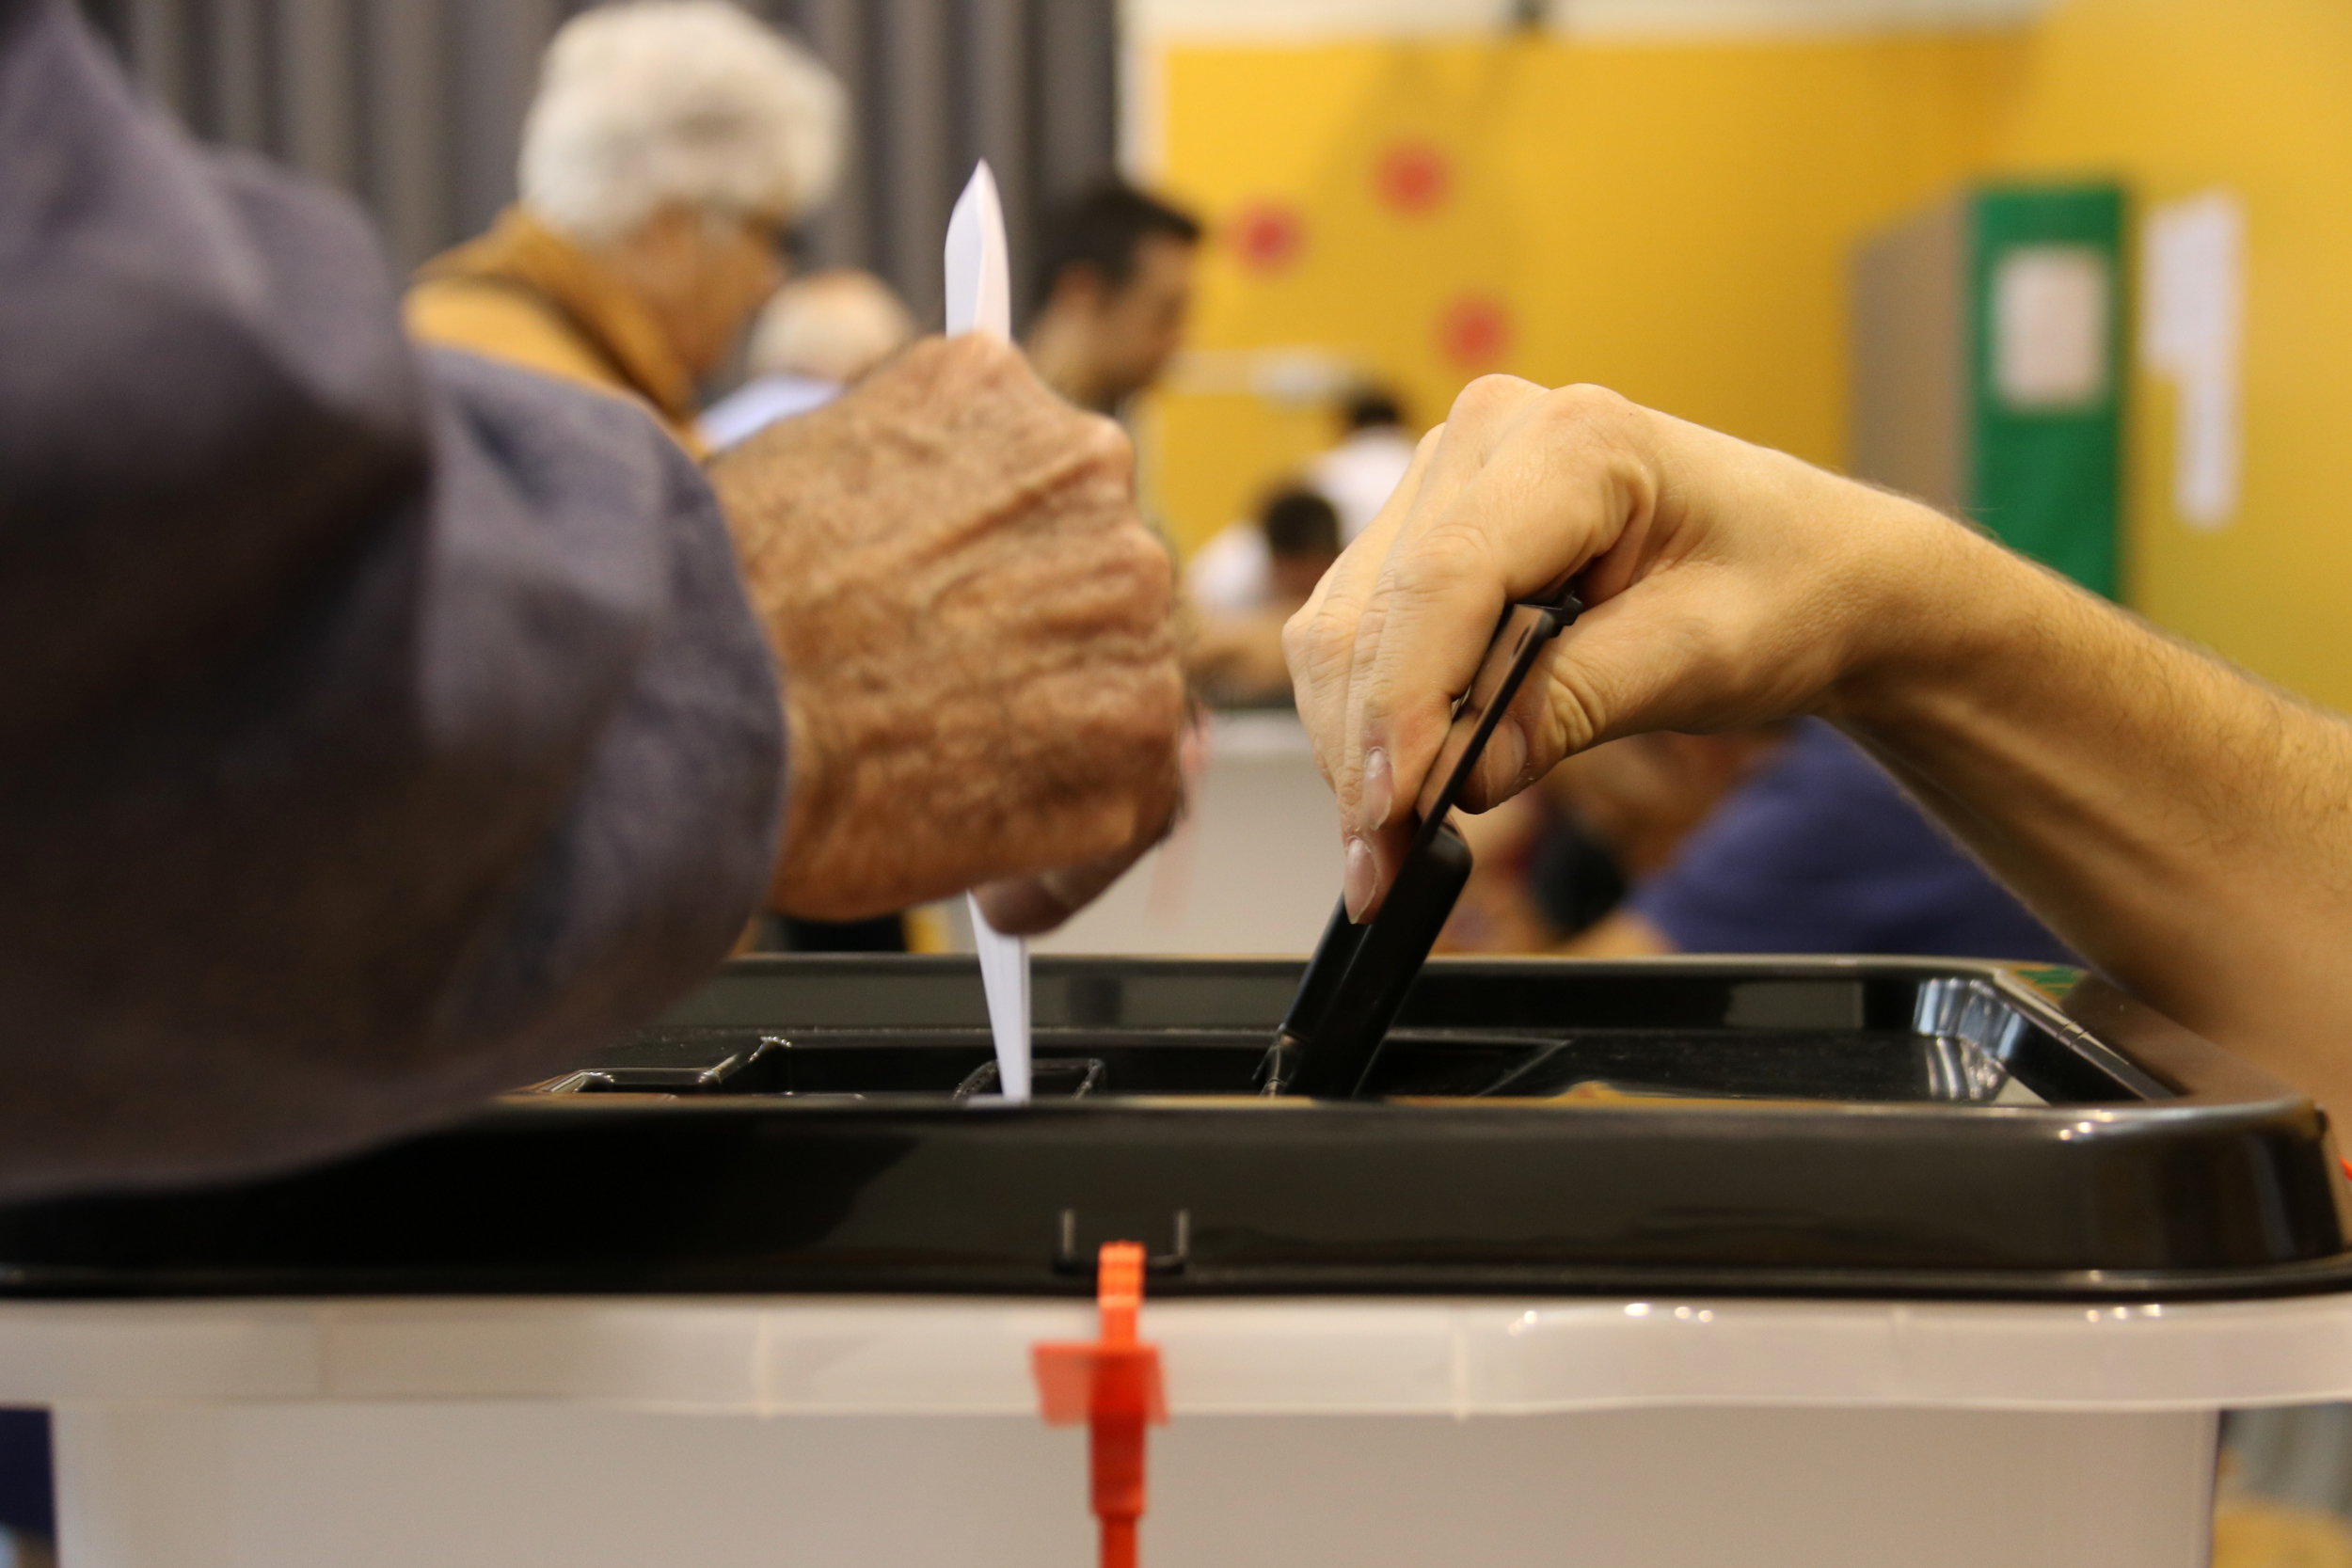 A ballot being placed in a ballot box on October 1 2017 in Teresa Miquel i Pàmies de Reus (by Jordi Marsal)